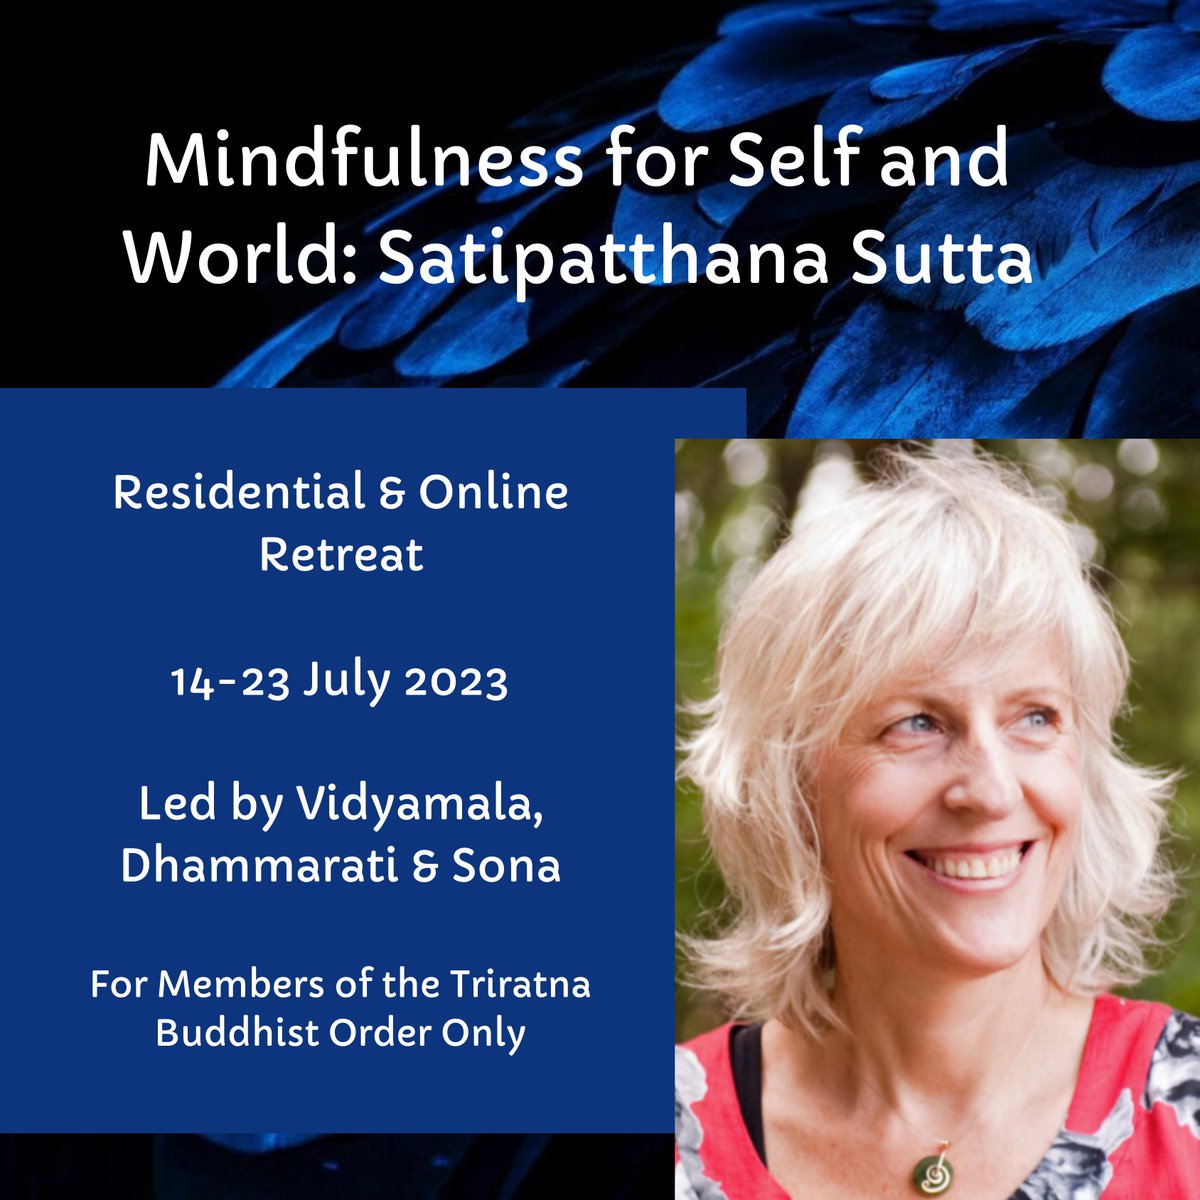 I’m super excited about the forthcoming 'Mindfulness for Self and World' retreat that I’m co-leading with Dhammarati and Sona. It will be a 'dual retreat': residential at Adhisthana (gorgeous in high summer) with a fully online option. For more, visit: adhisthana.org/retreat-calend…